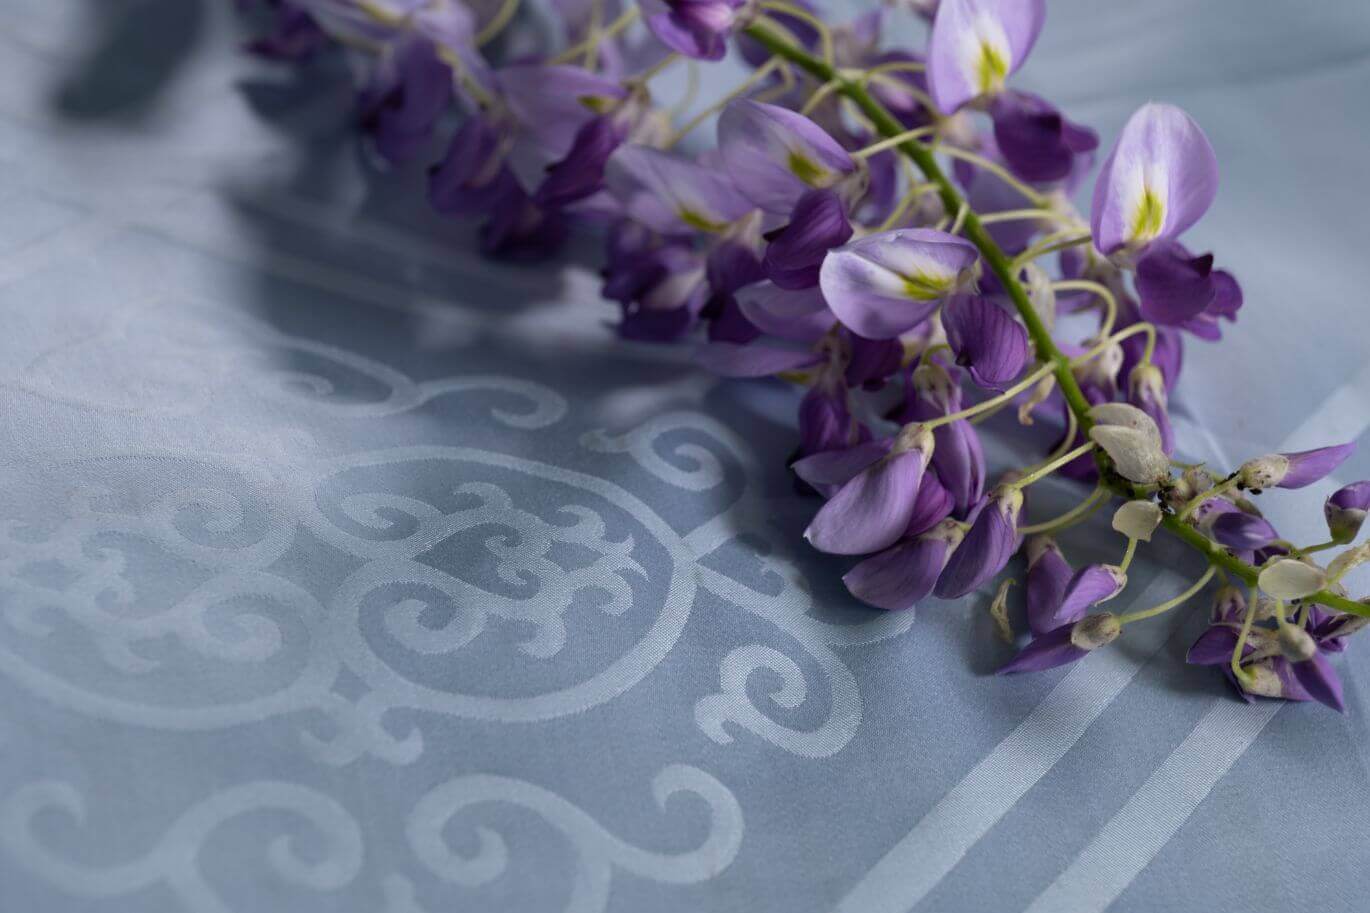 jacquard with portuguese sidewalk pattern and purple flowers